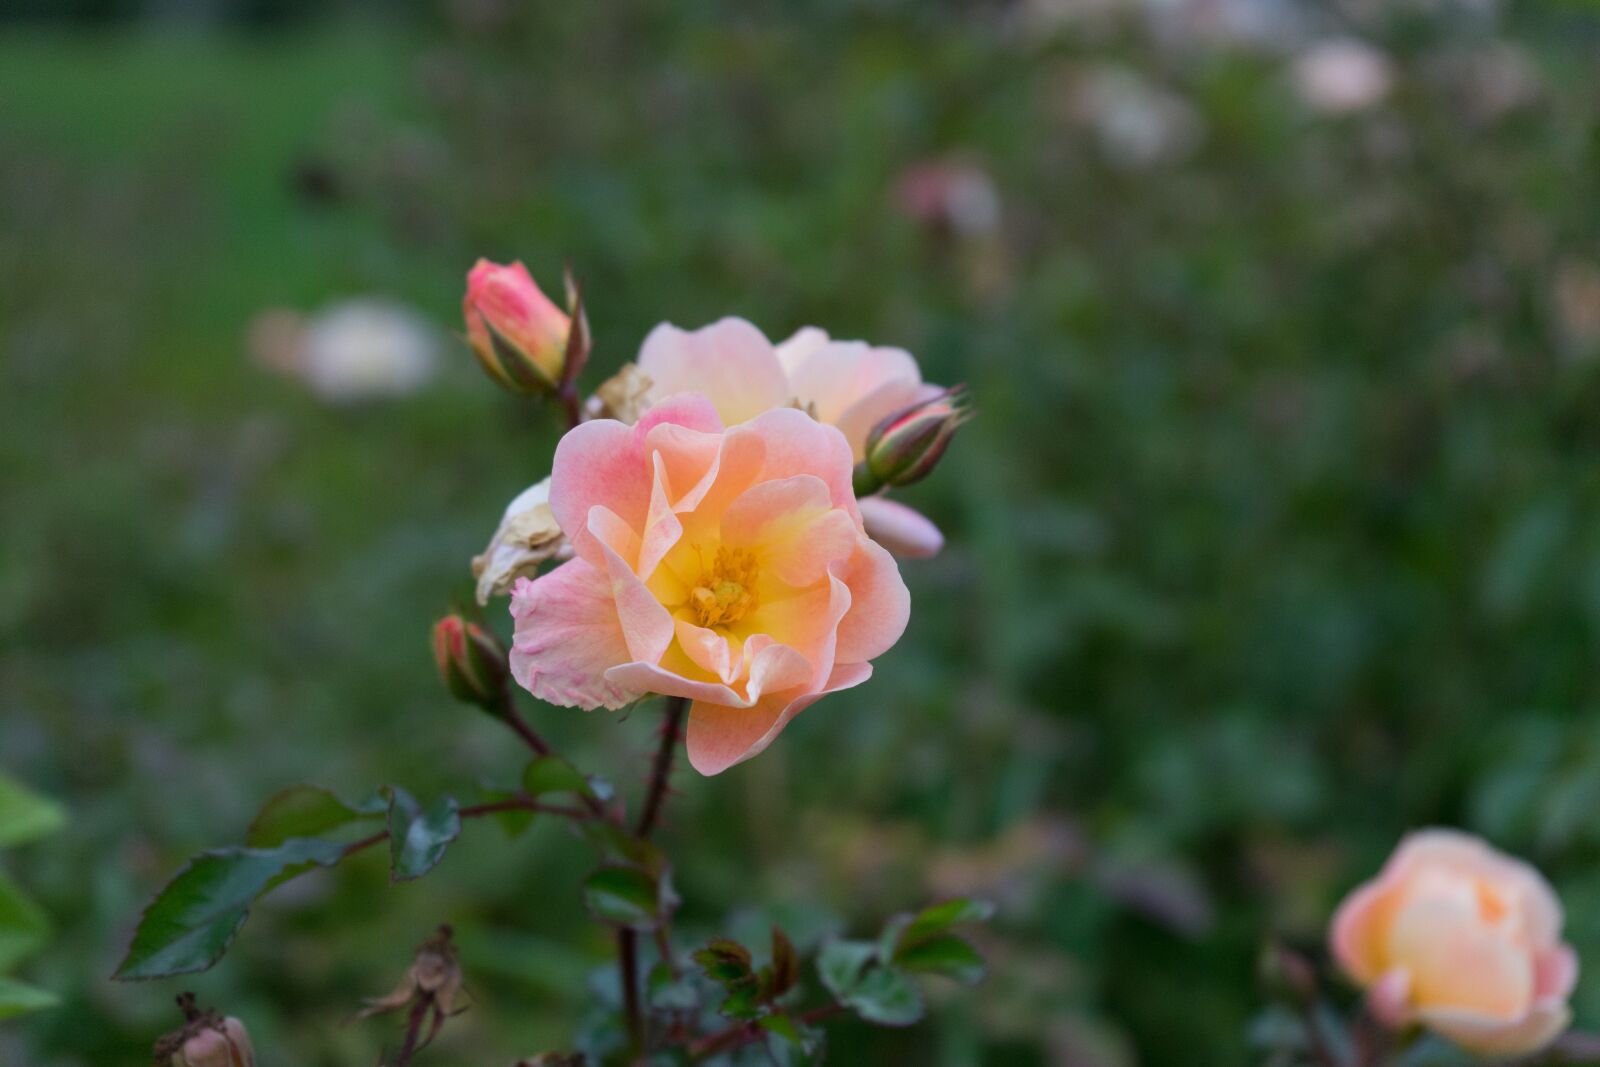 Sony a7 II sample photo. Rose, roses, nature photography